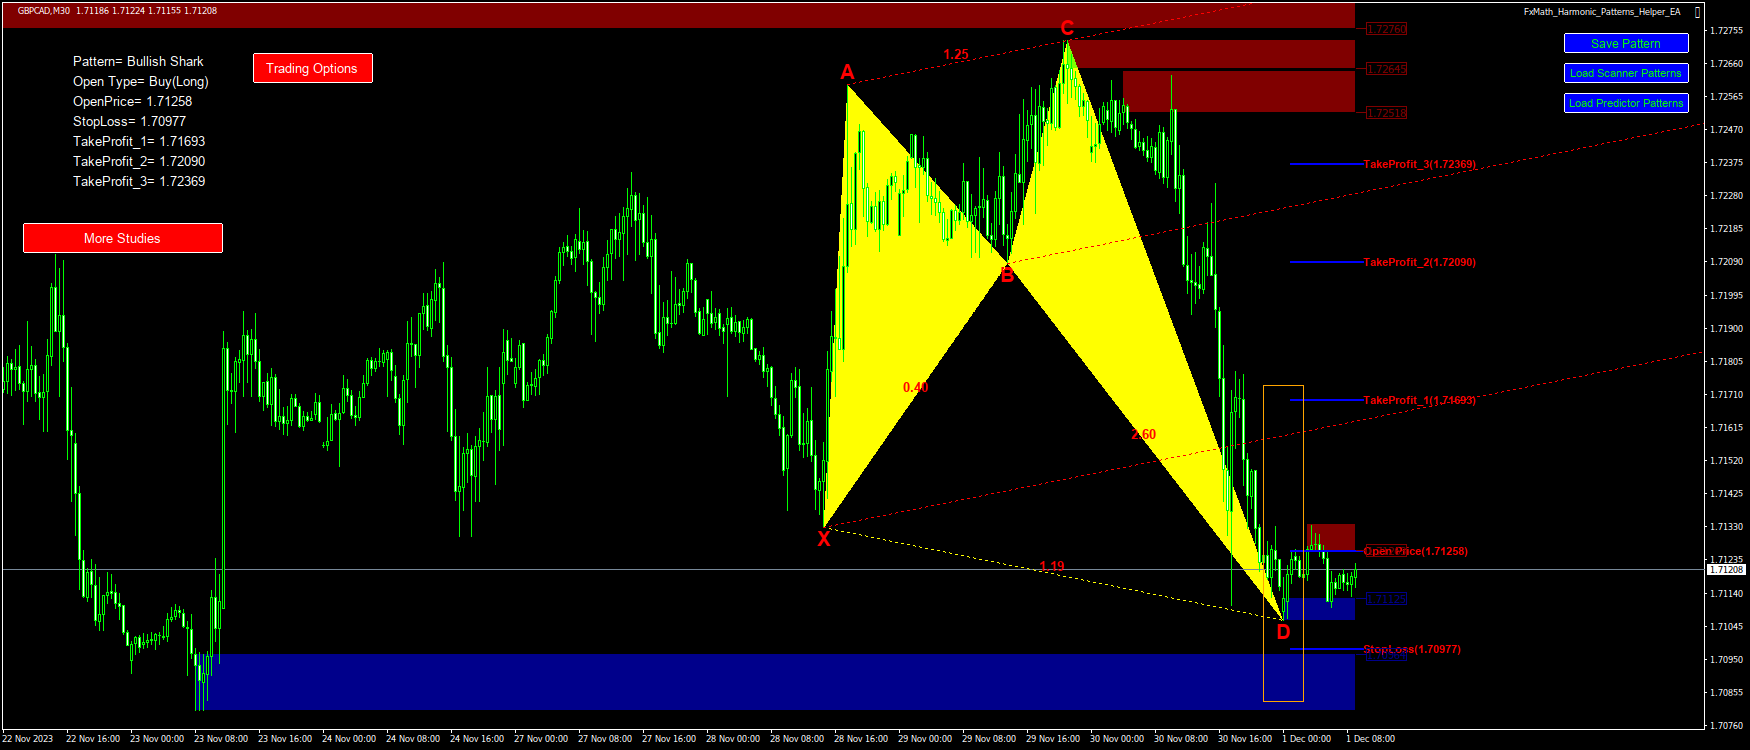 @GBPCAD(H1)-Pattern: Cypher : BuyStop@: 1.71258, StopLoss: 1.70977, TakeProfit_1: 1.71693, TakeProfit_2: 1.72090, TakeProfit_3: 1.72369-2023.12.01 09:06